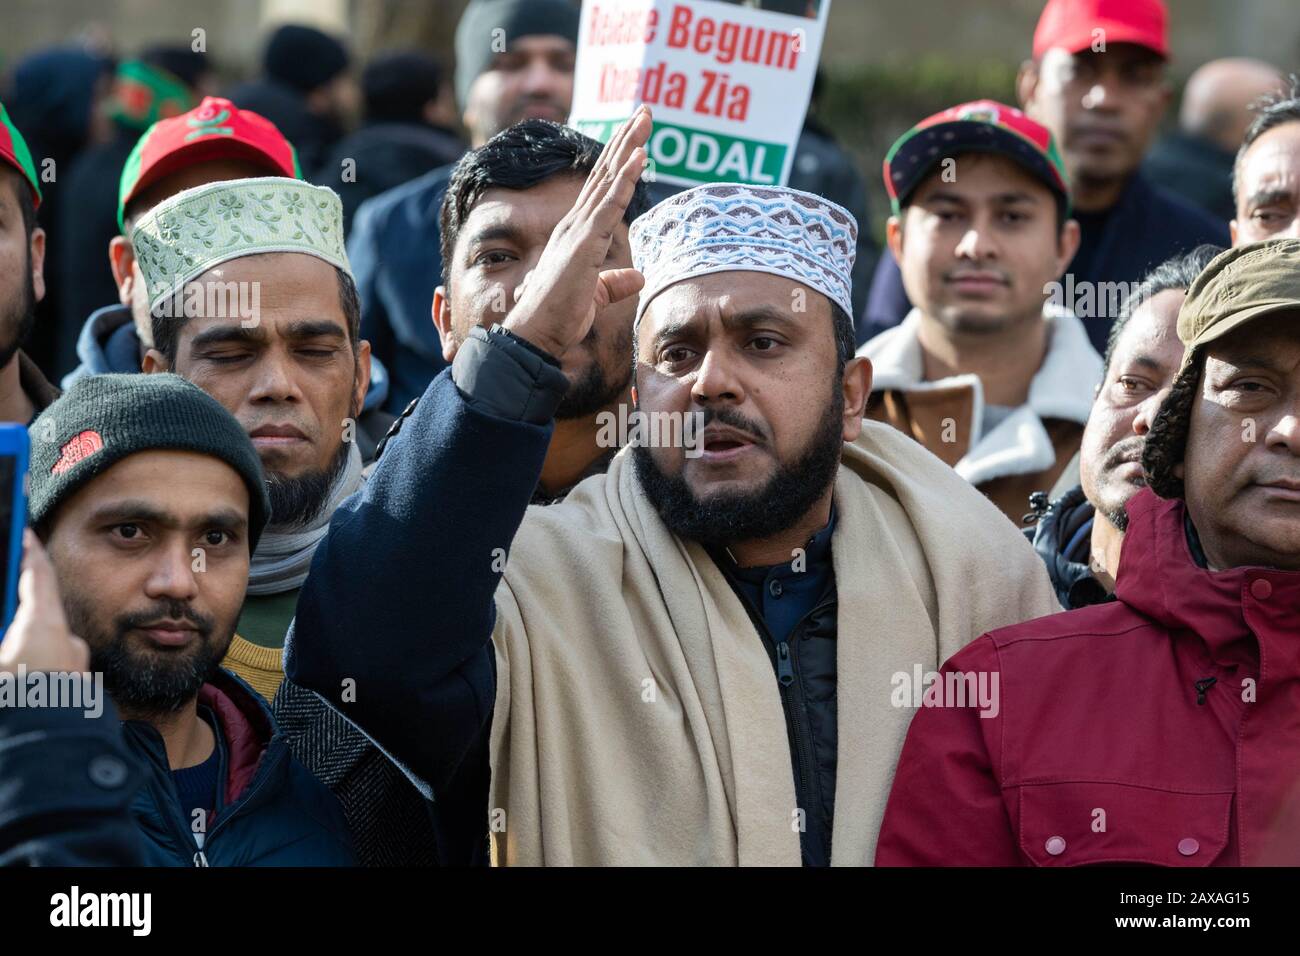 London, UK. 11th Feb, 2020. Members of the Bangladesh Nationalist Party attend a large and noisy protest opposite the Houses of Parliament to protest against the alleged illegal detention of party leaders in Bangladesh Credit: Ian Davidson/Alamy Live News Stock Photo